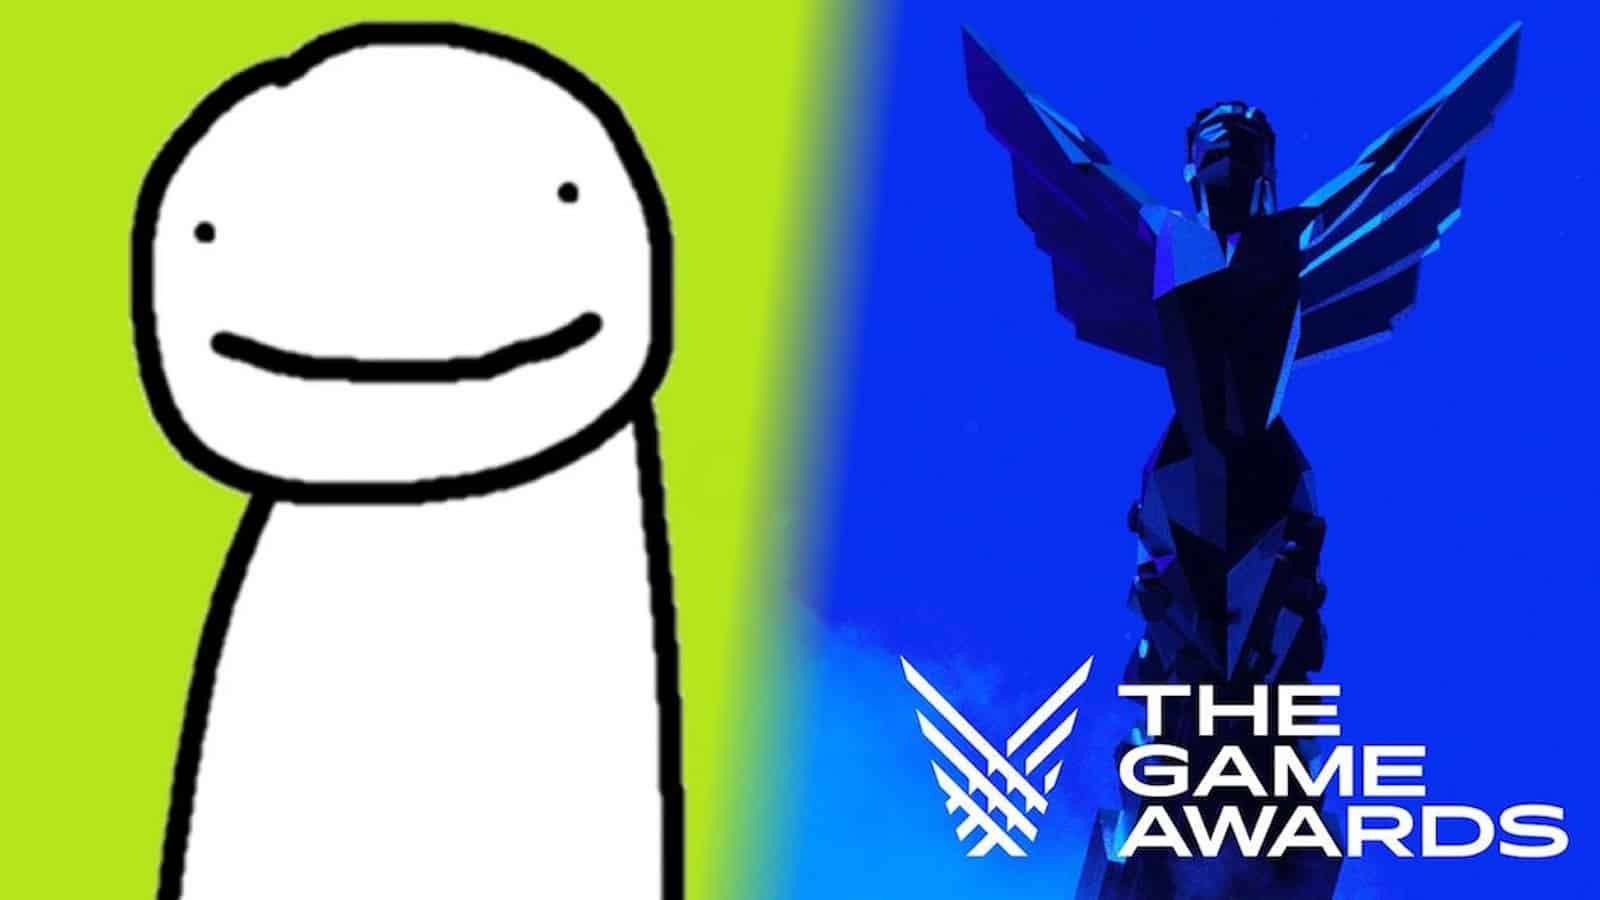 Dream The Game Awards Content Creator of the Year Award Ludwig Drama Addressed